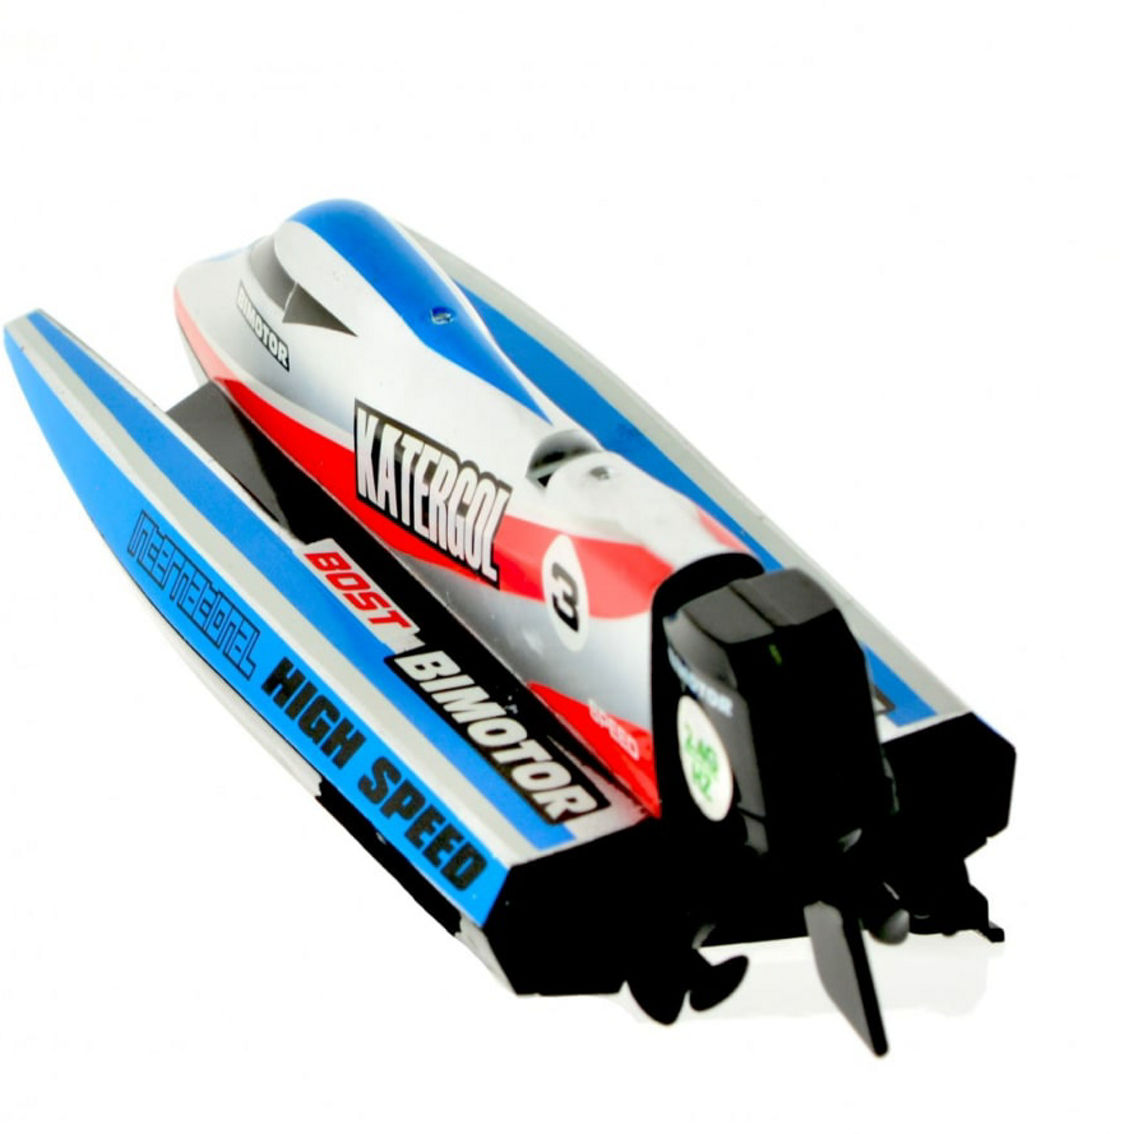 CIS-3313M-O Micro 2.4 Ghz Formula 1 speed boat with decals 2 colors Red and Blue - Image 5 of 5